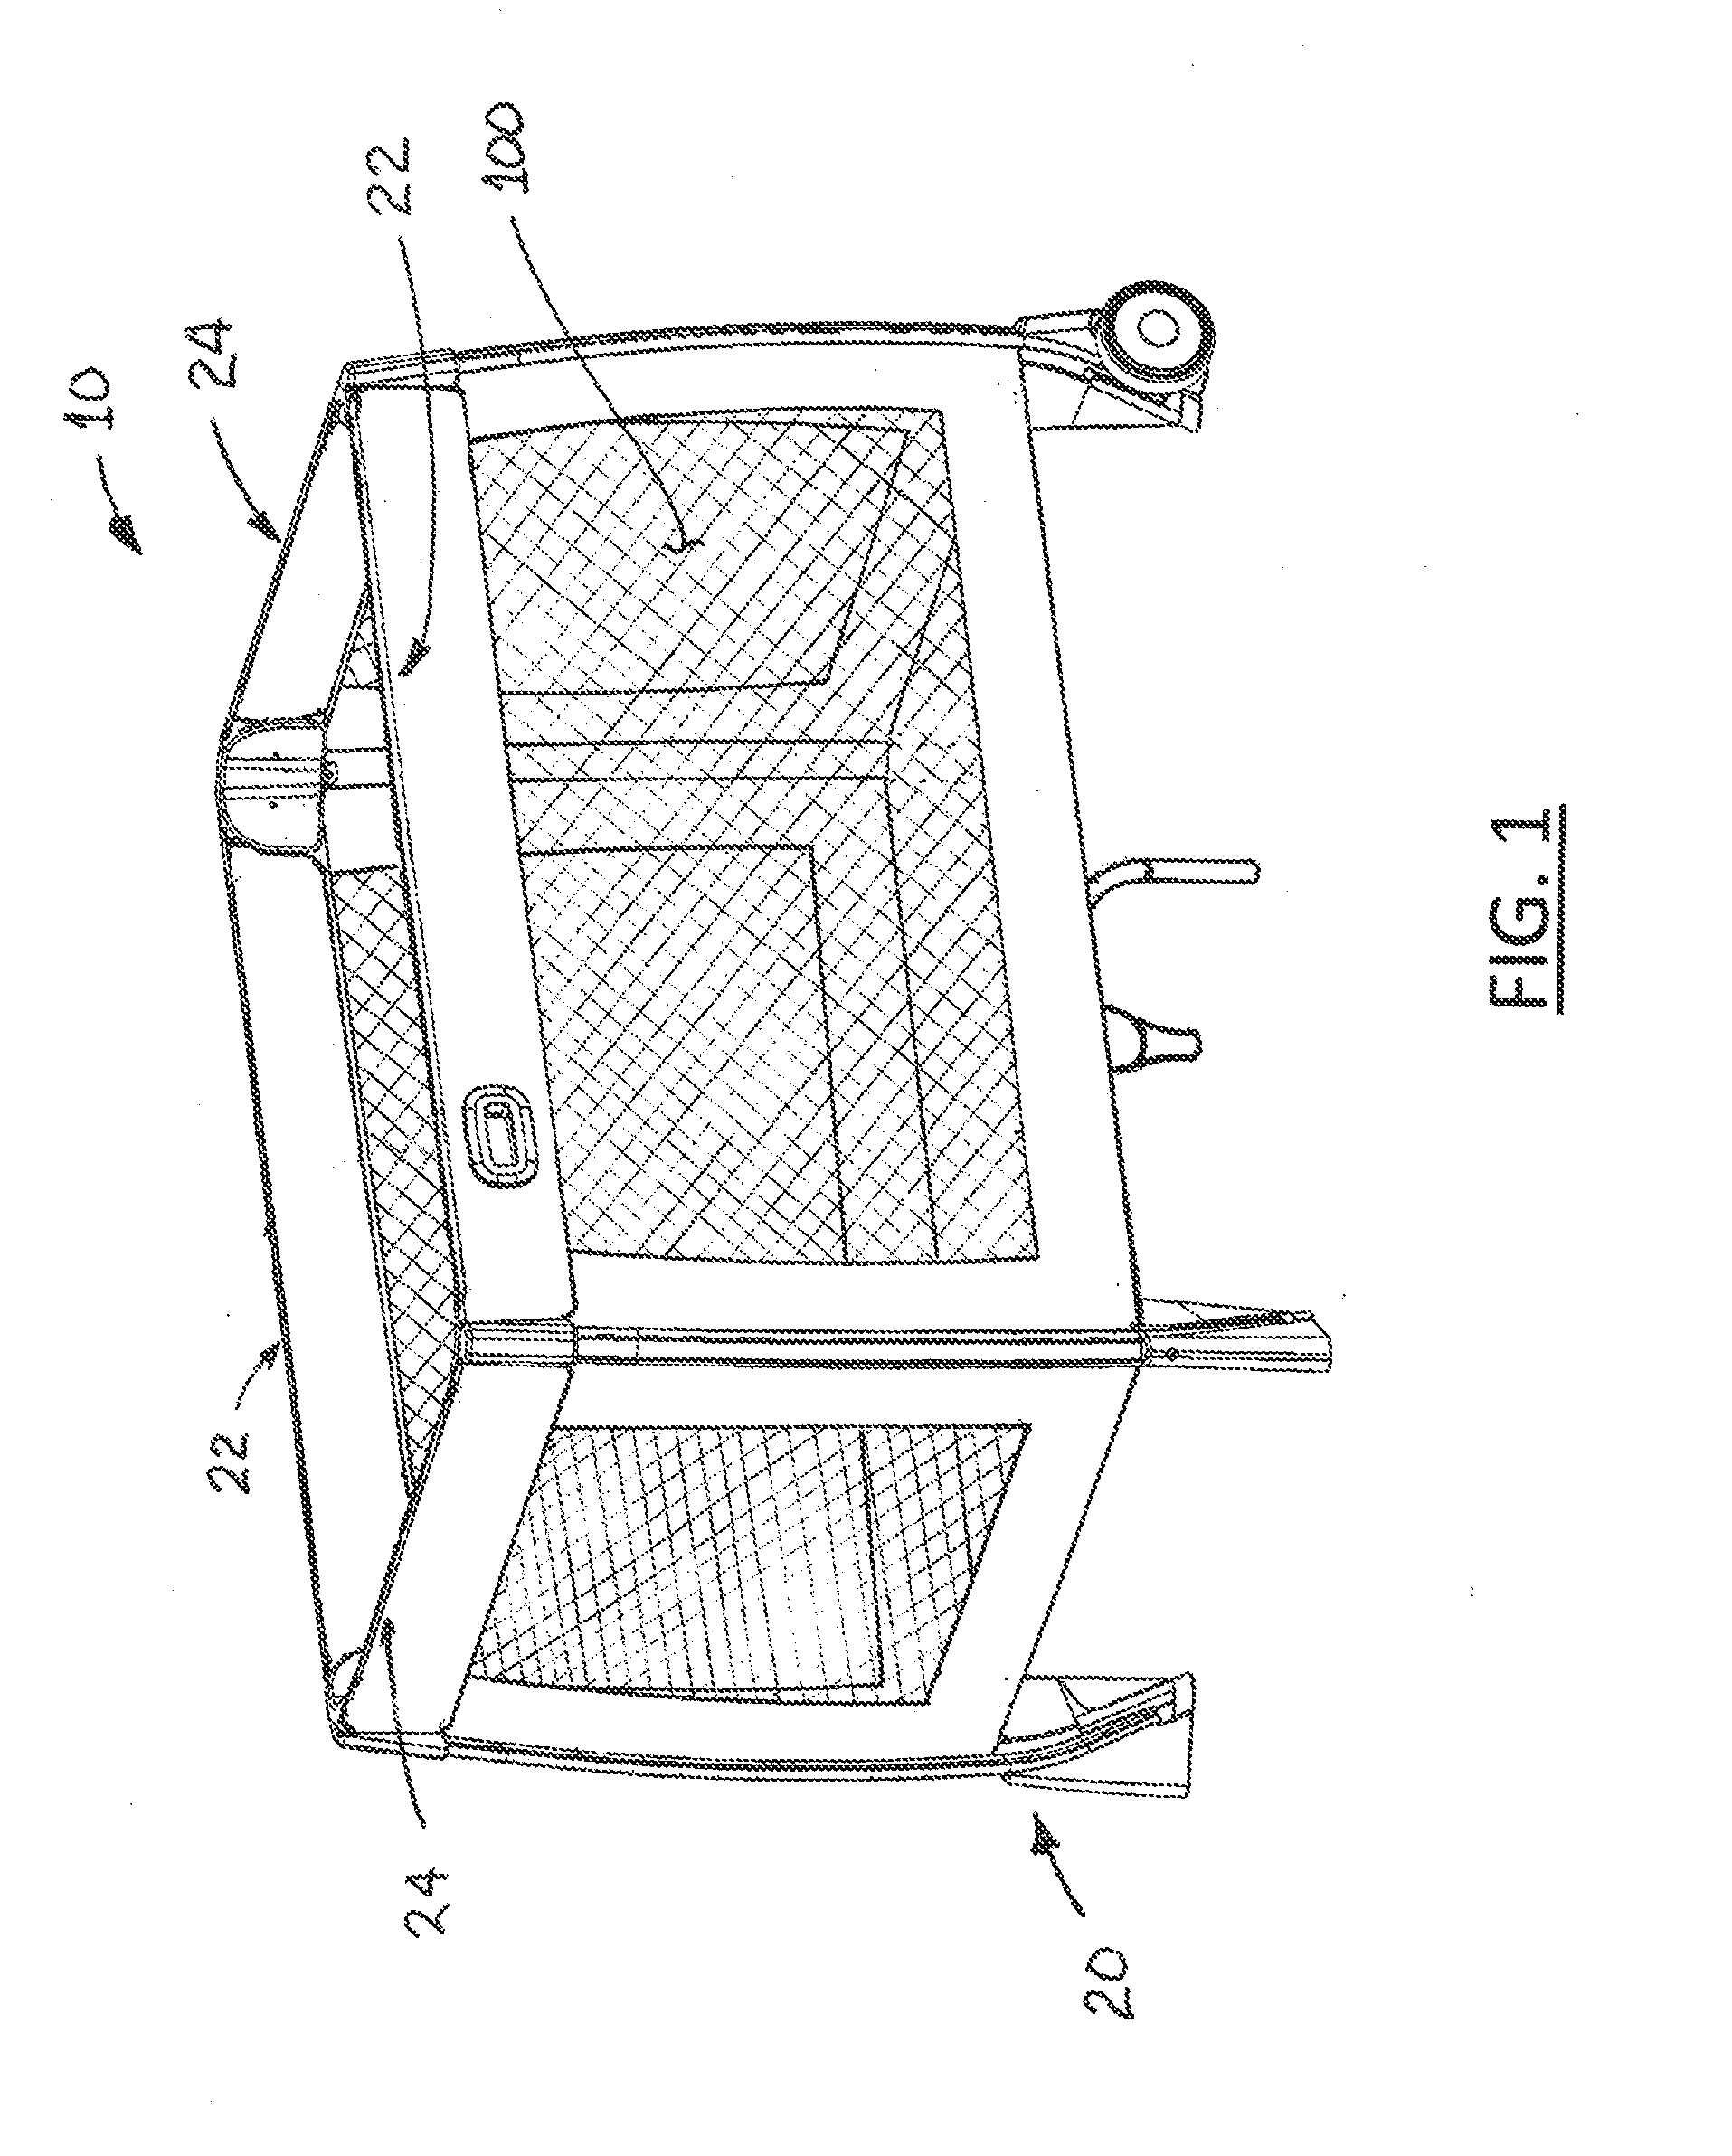 Bi-axially collapsible frame for a bassinet